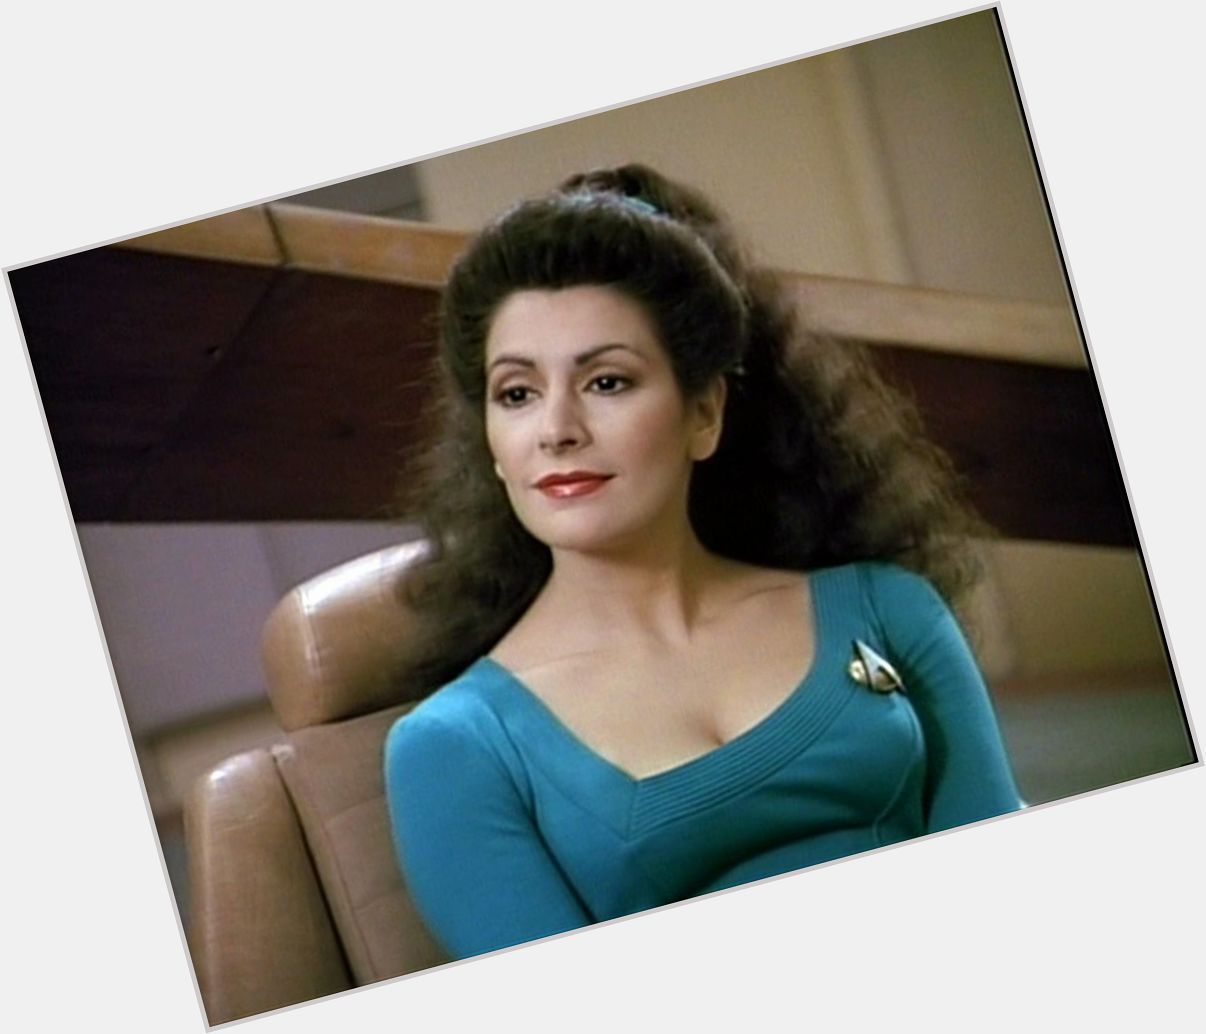 Today, Mar 29th ~ Happy Birthday to the one and only A fav as Counsellor Deanna Troi  